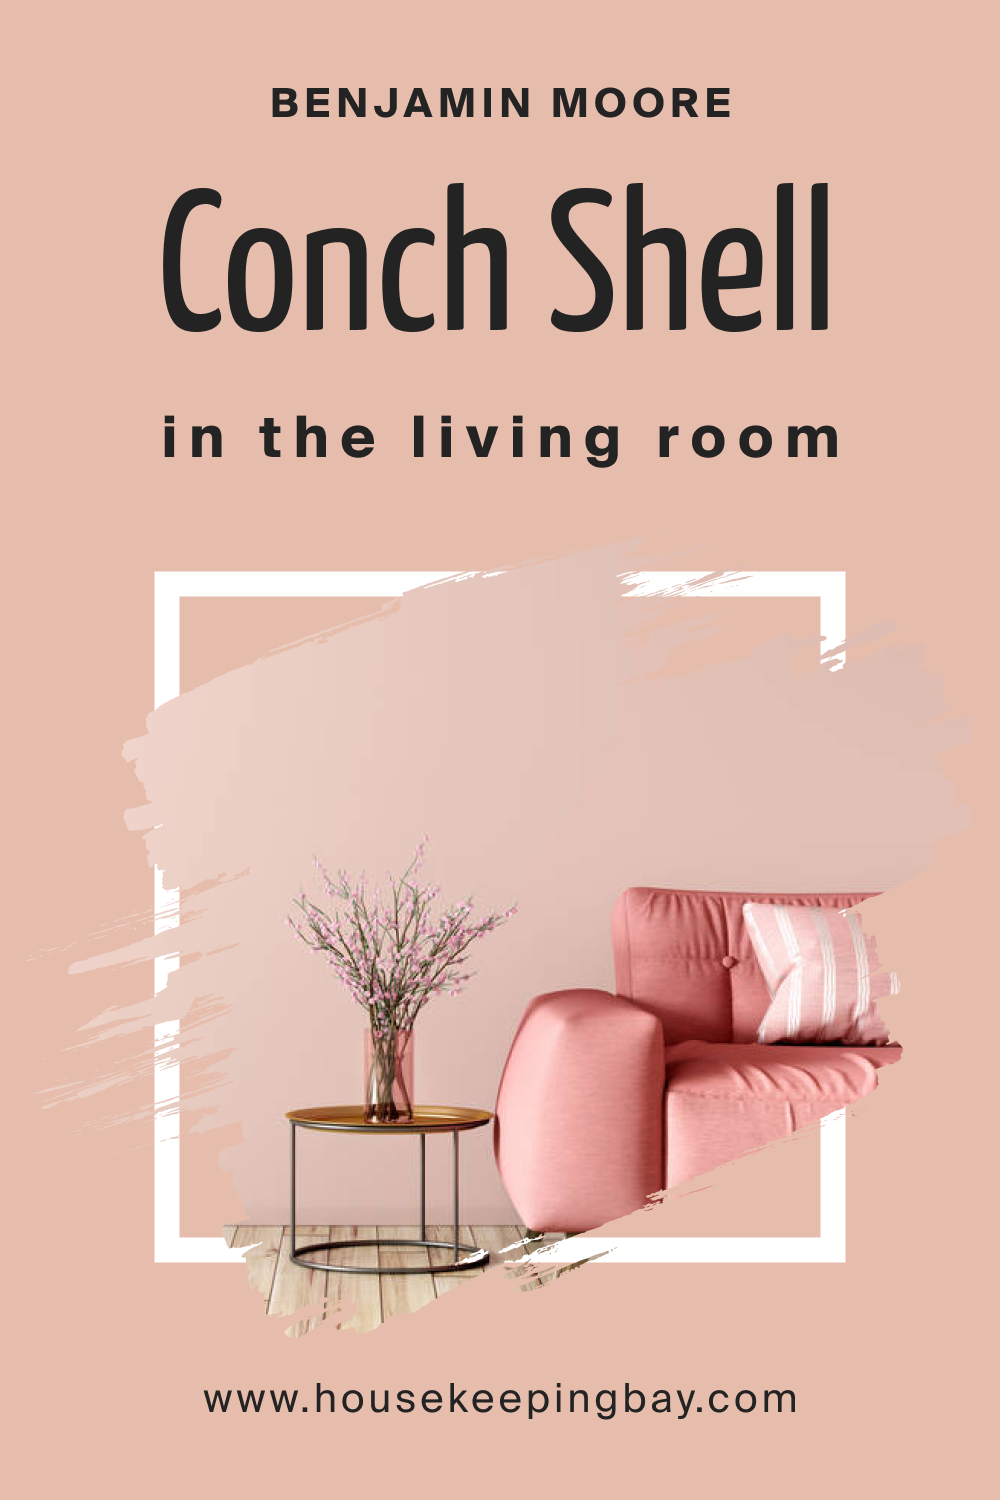 Benjamin Moore. Conch Shell 052 in the Living Room